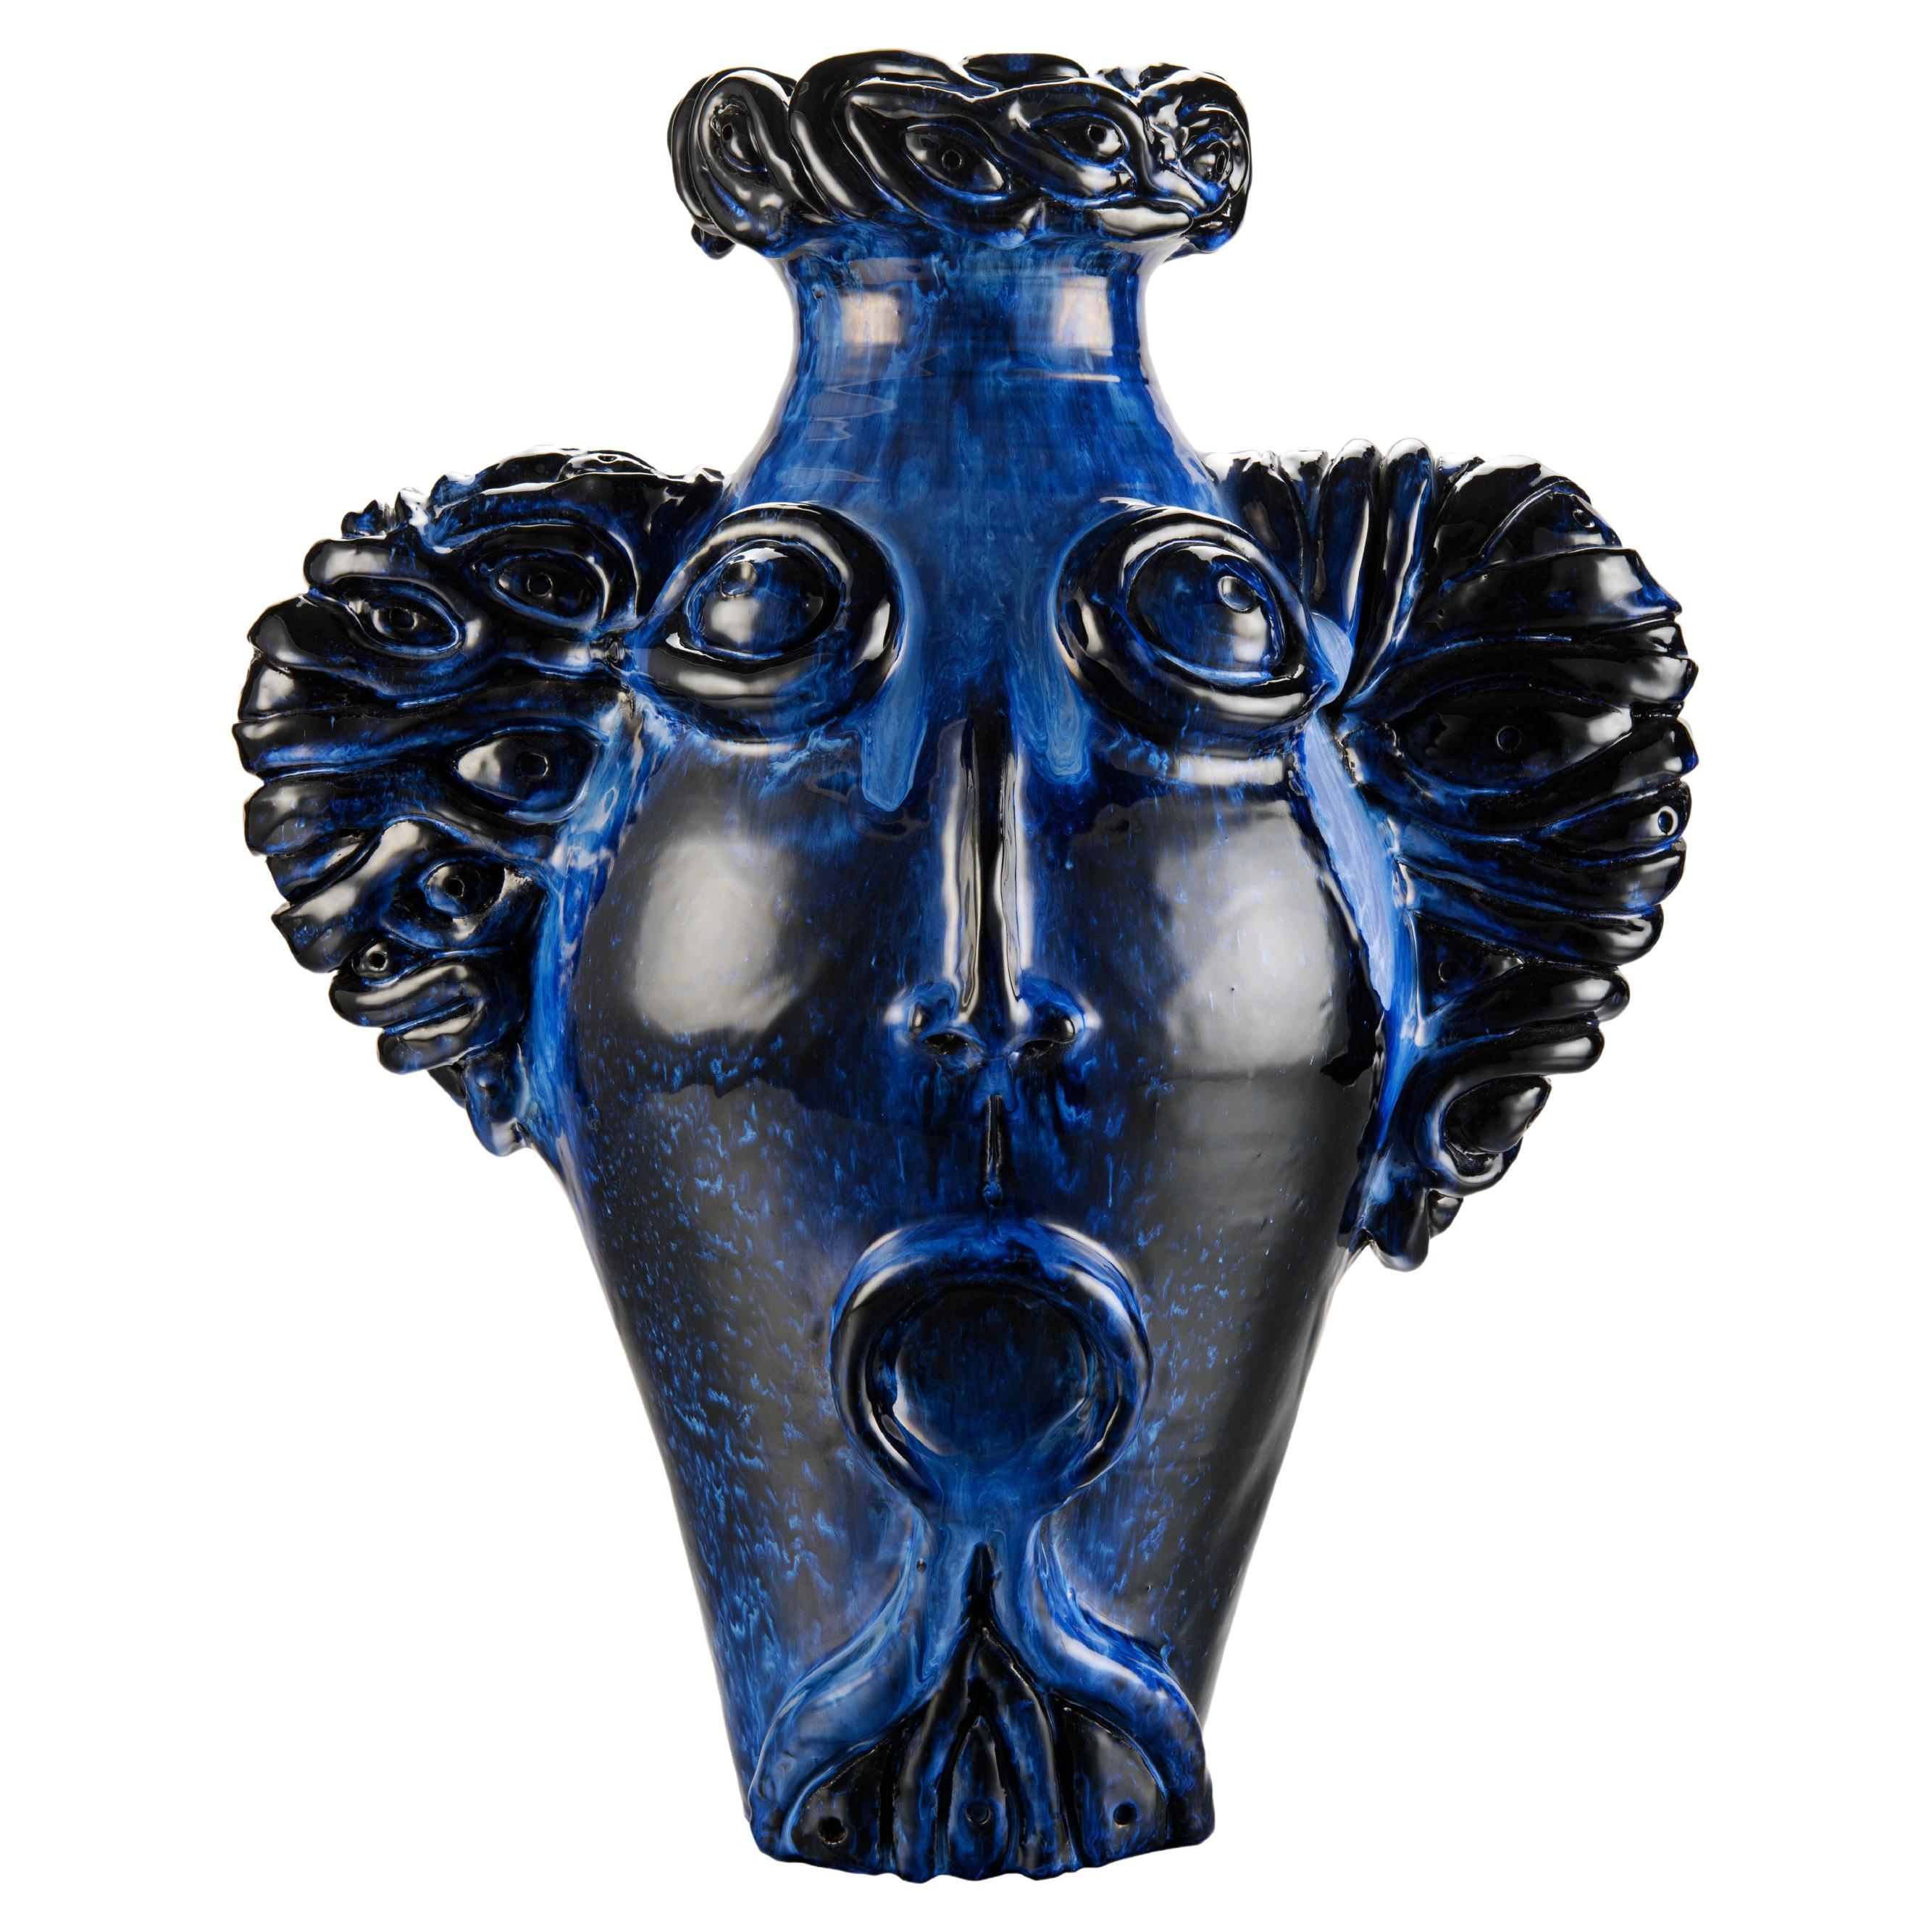 Freaklab Vase Made Entirely by Hand in Ceramic, Iridescent Blue Color